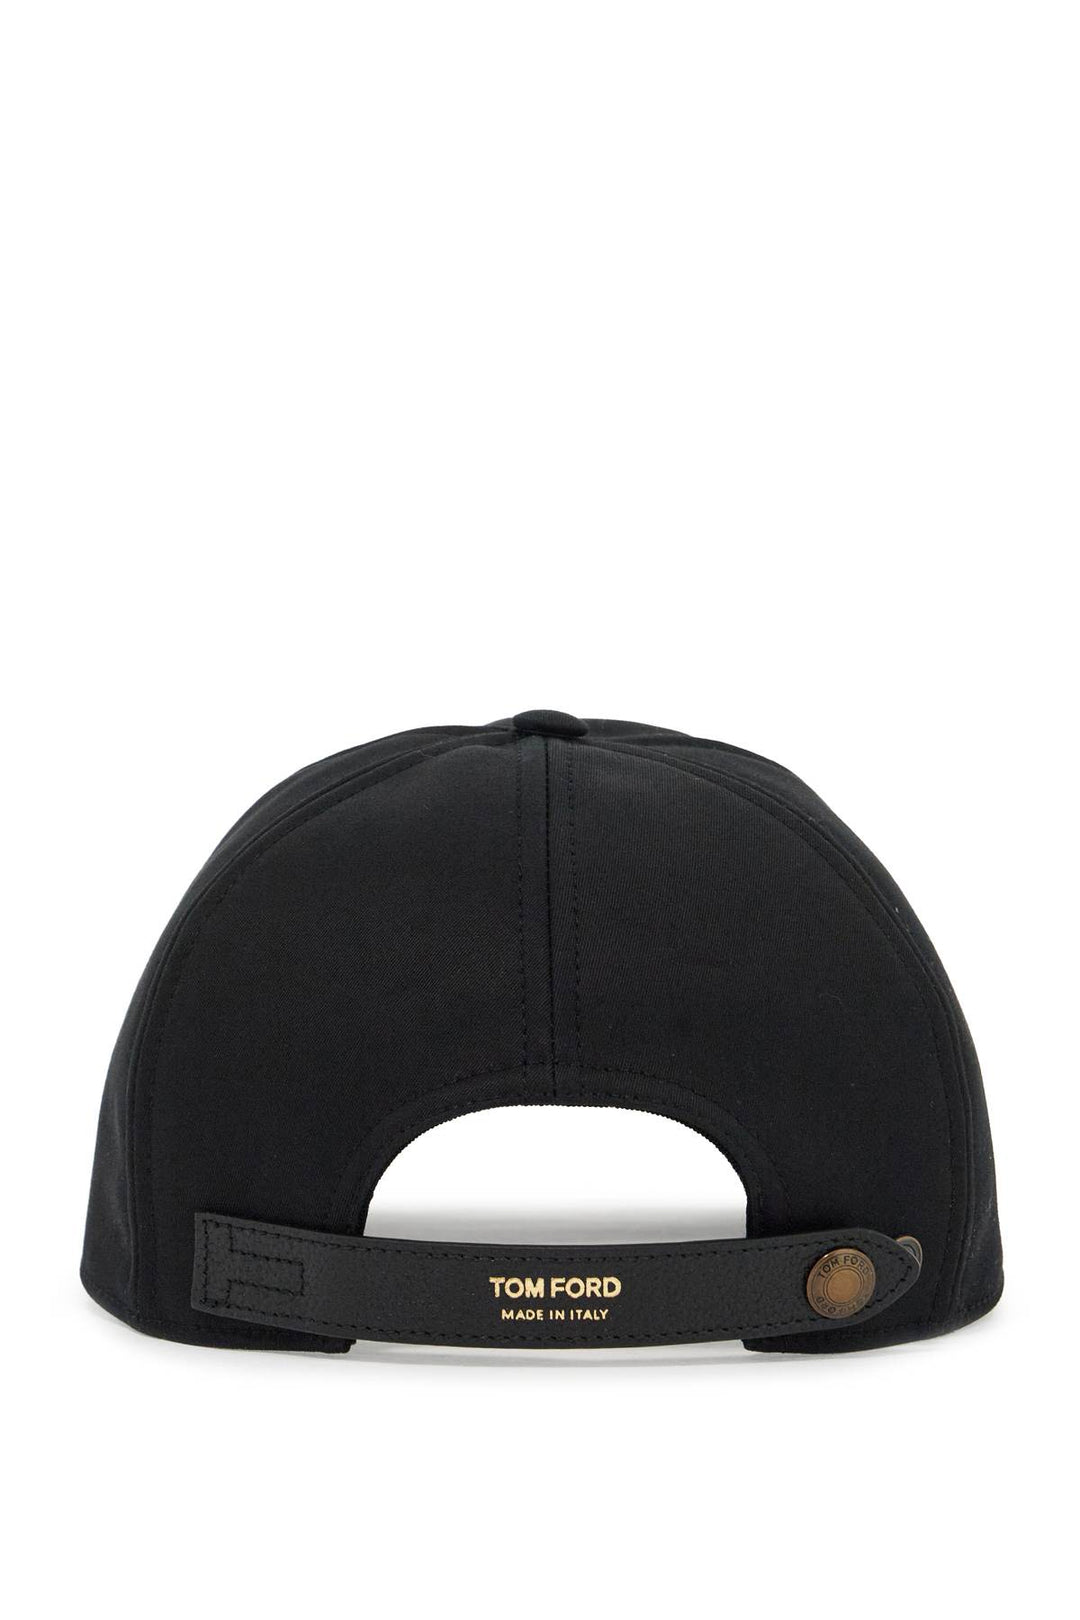 Tom Ford Baseball Cap With Embroidery   Black